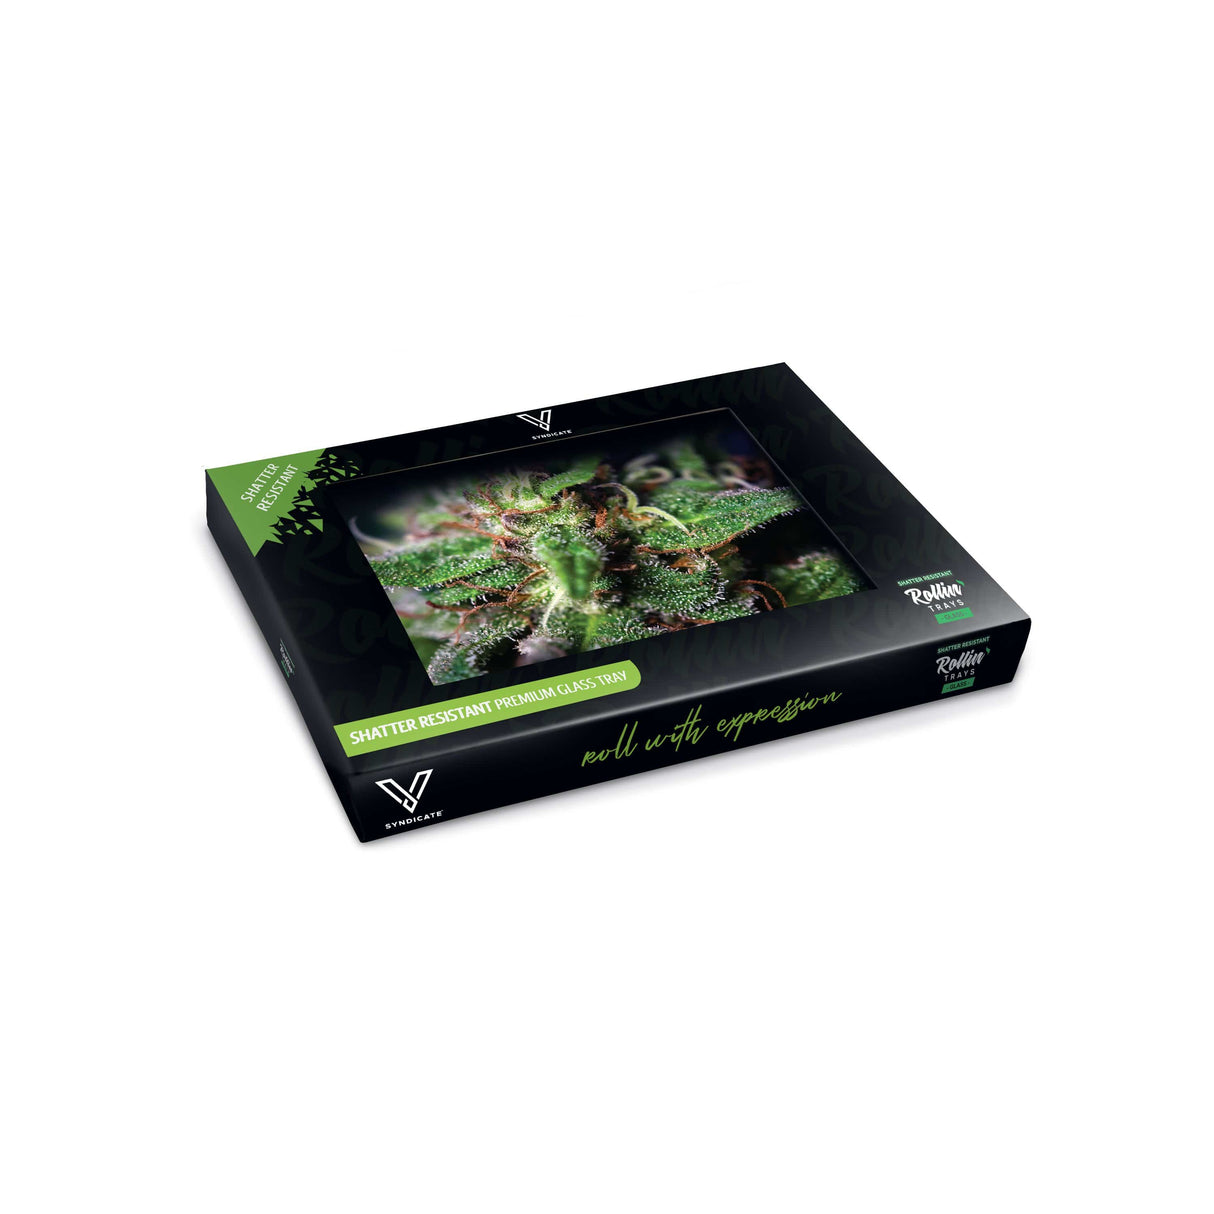 V Syndicate Blue Dream Glass Rollin' Tray with vibrant green and purple hues, compact design, angled view